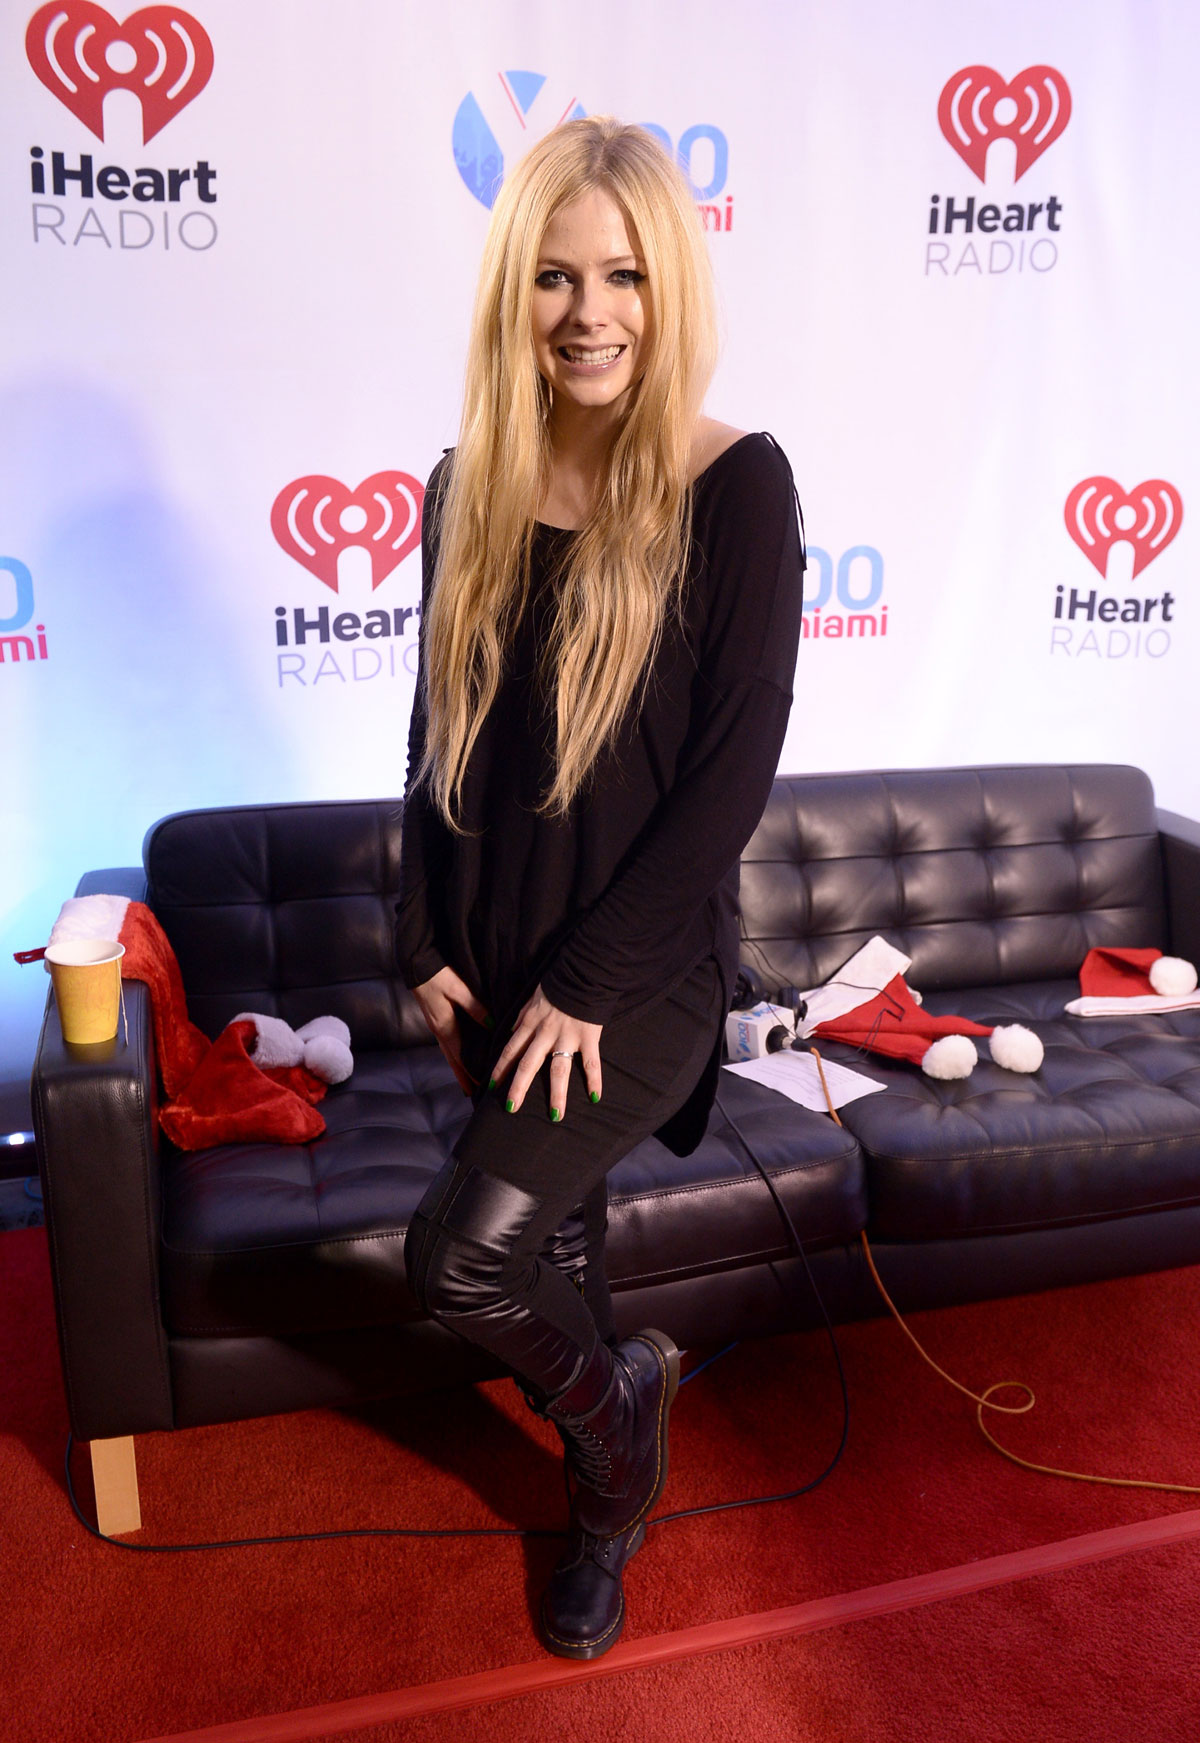 Avril Lavigne performs at Y100 Jingle Ball